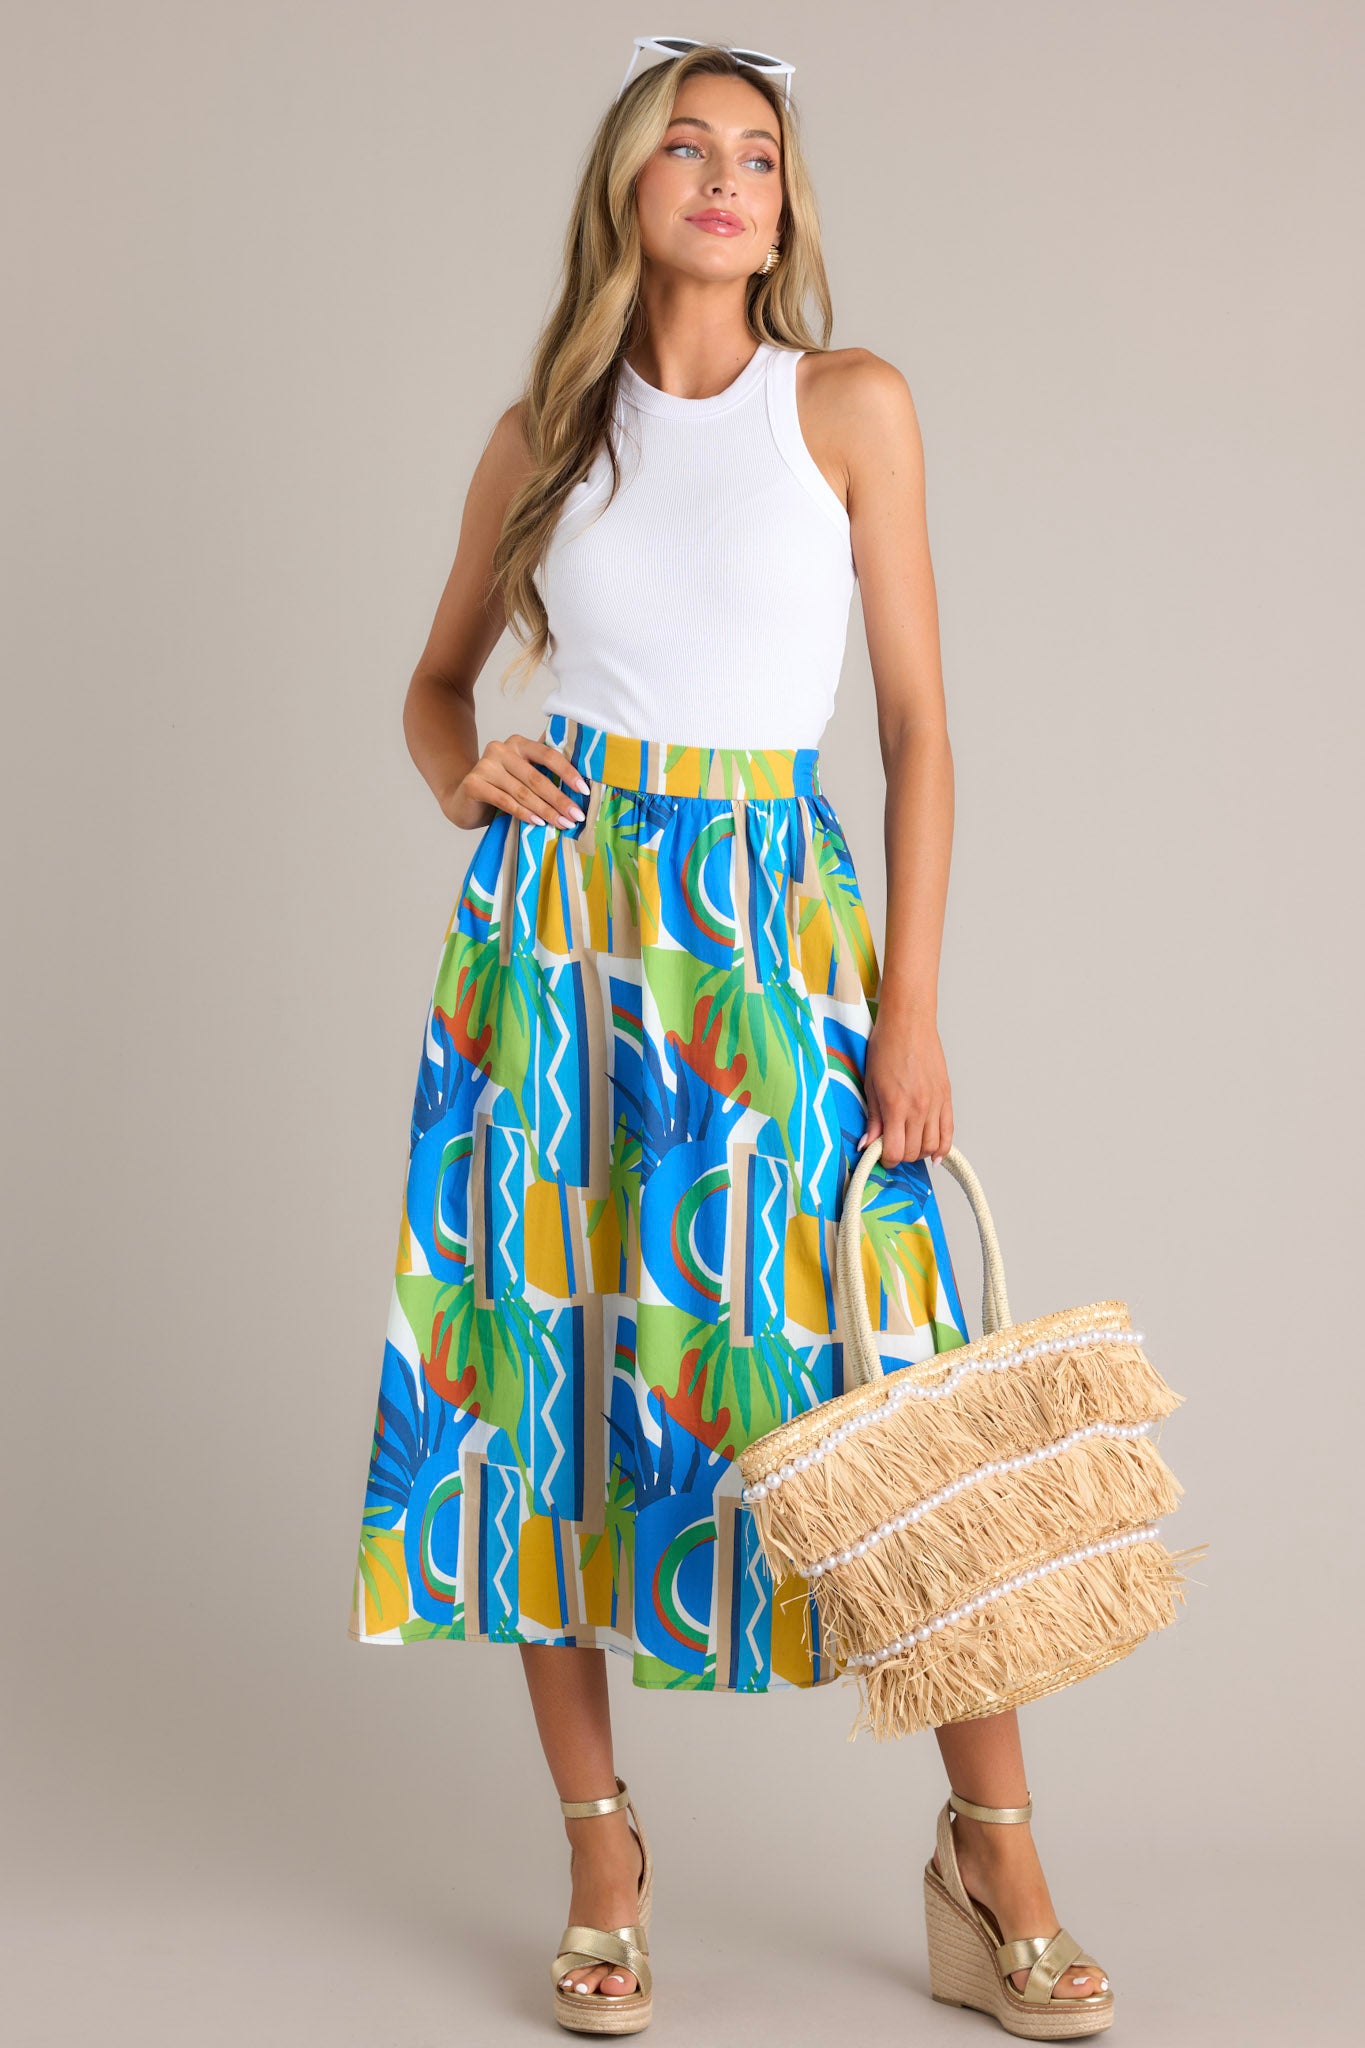 Full body view of a vibrant, high-waisted A-line skirt with an abstract blue, green, and yellow pattern.